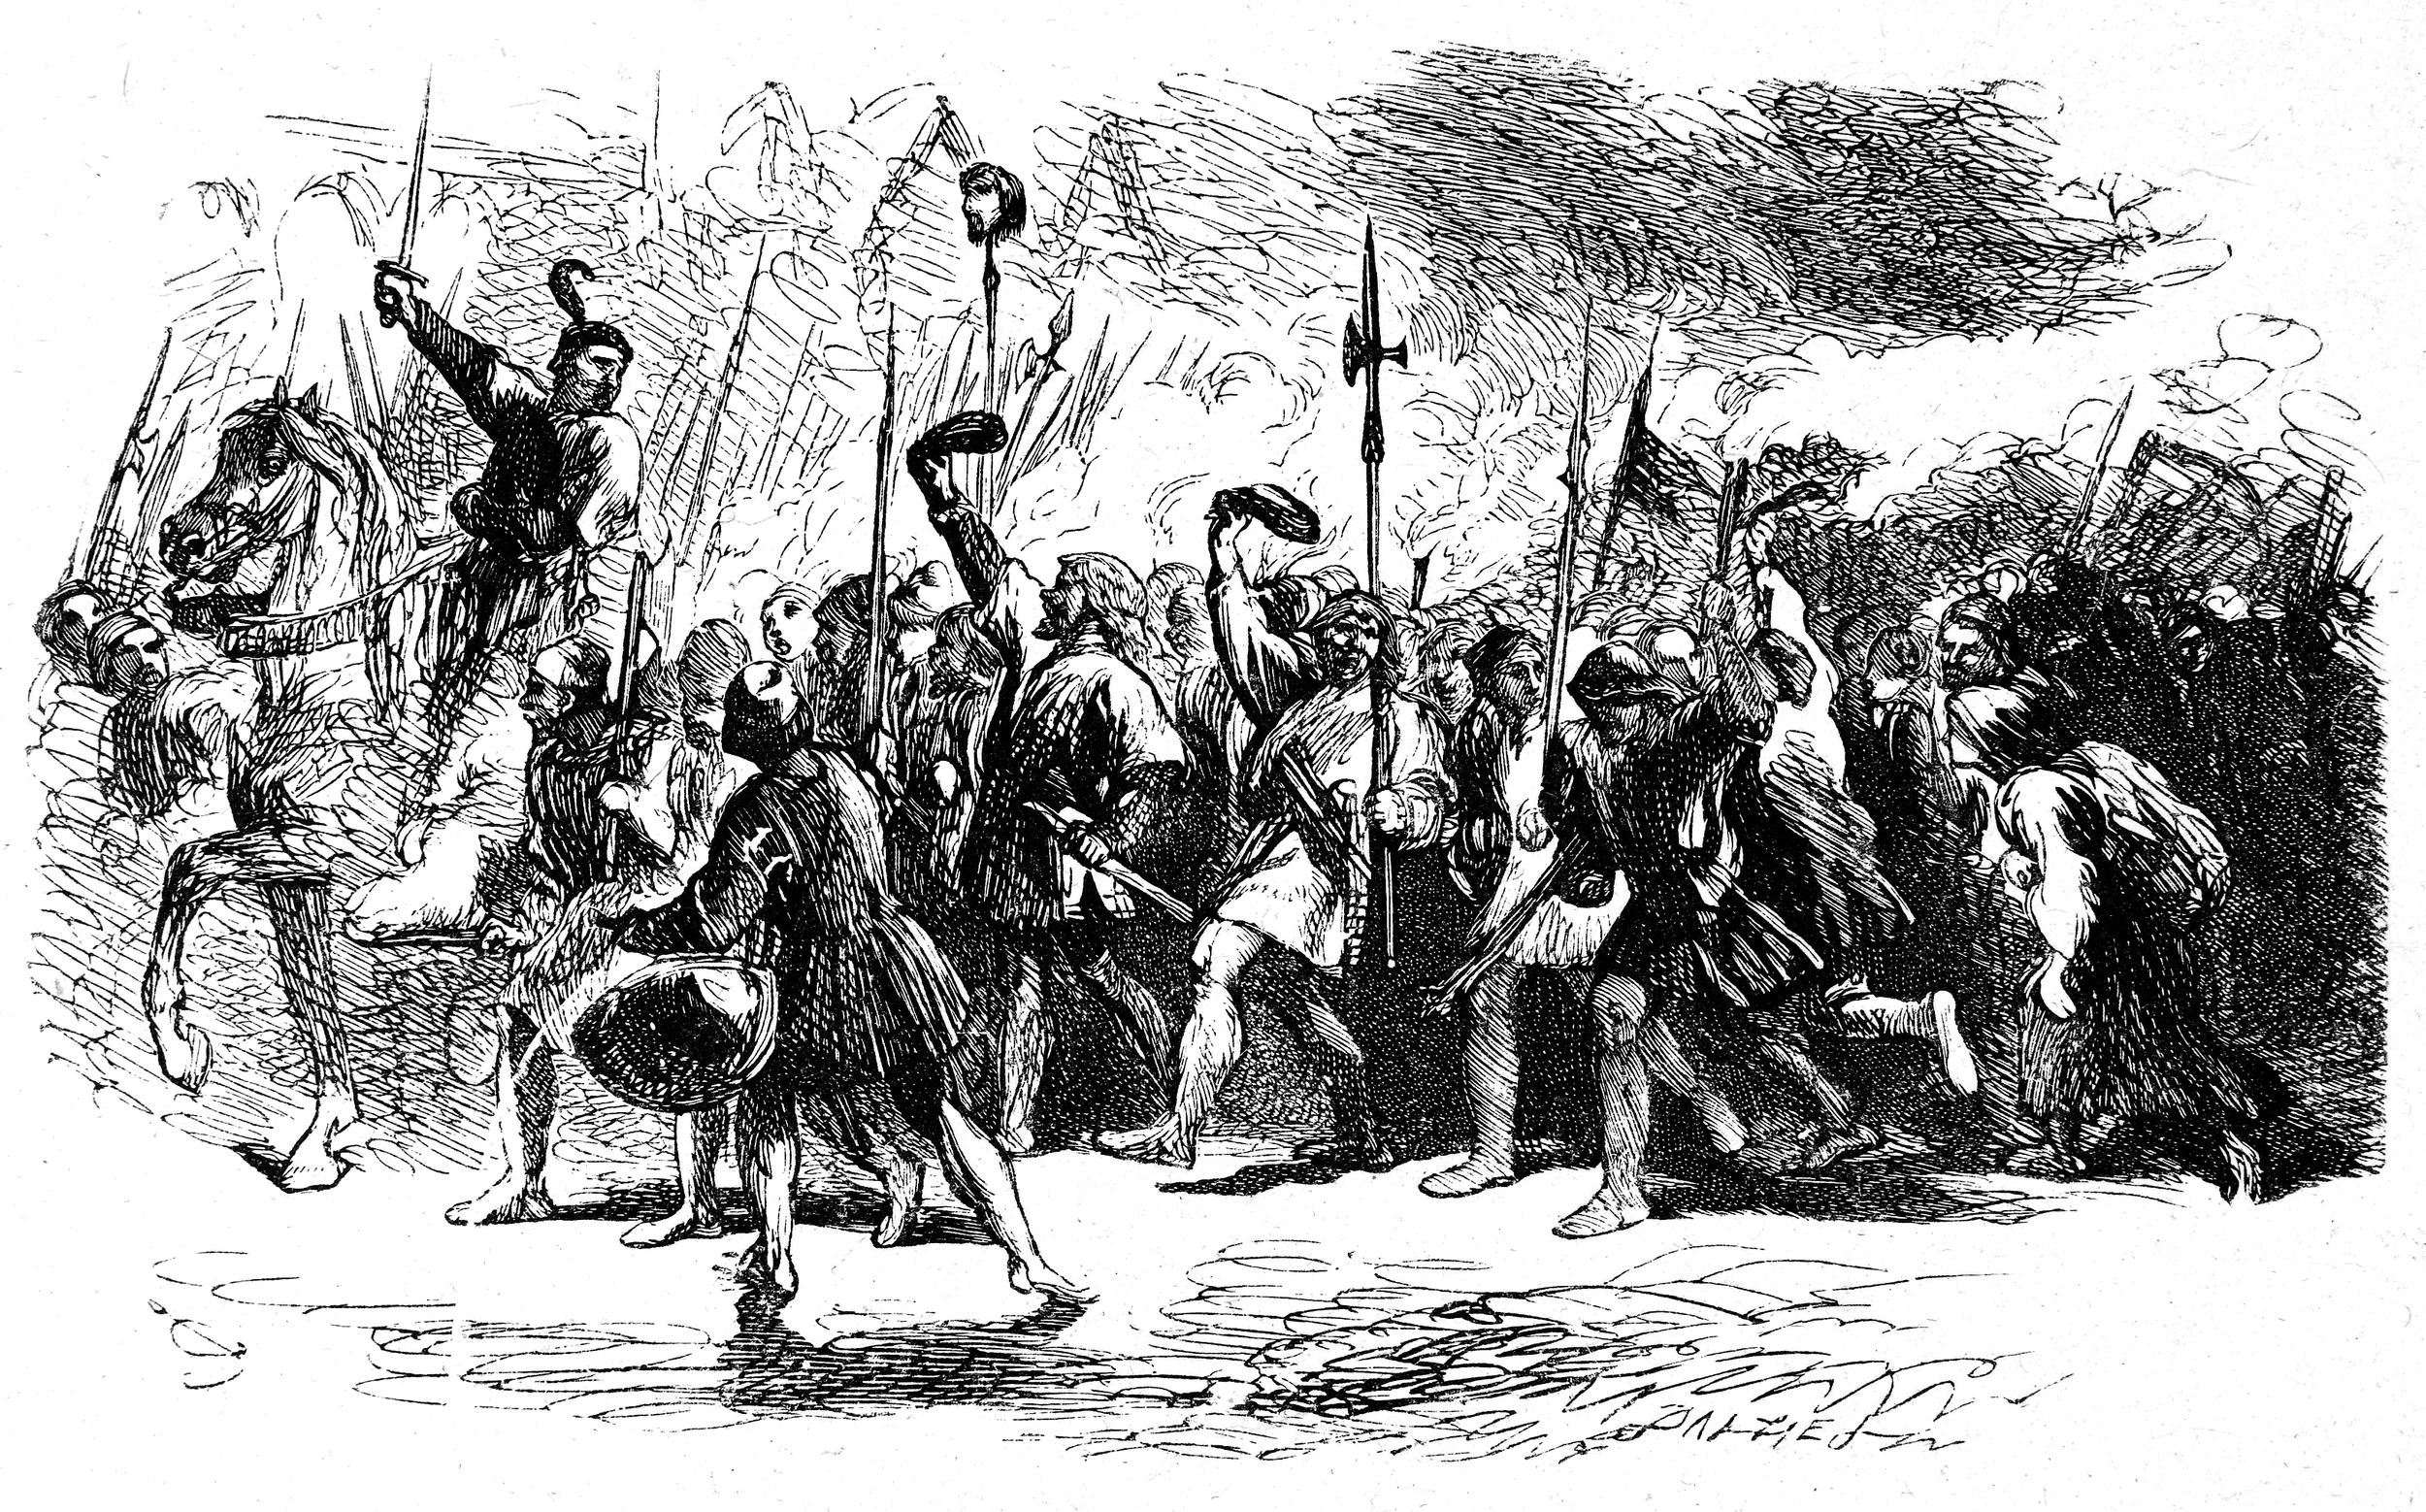 Buckingham and Clifford lead Lancastrian forces in this illustration by Sir John Gilbert for Shakespeare’s Henry VI, Part II.